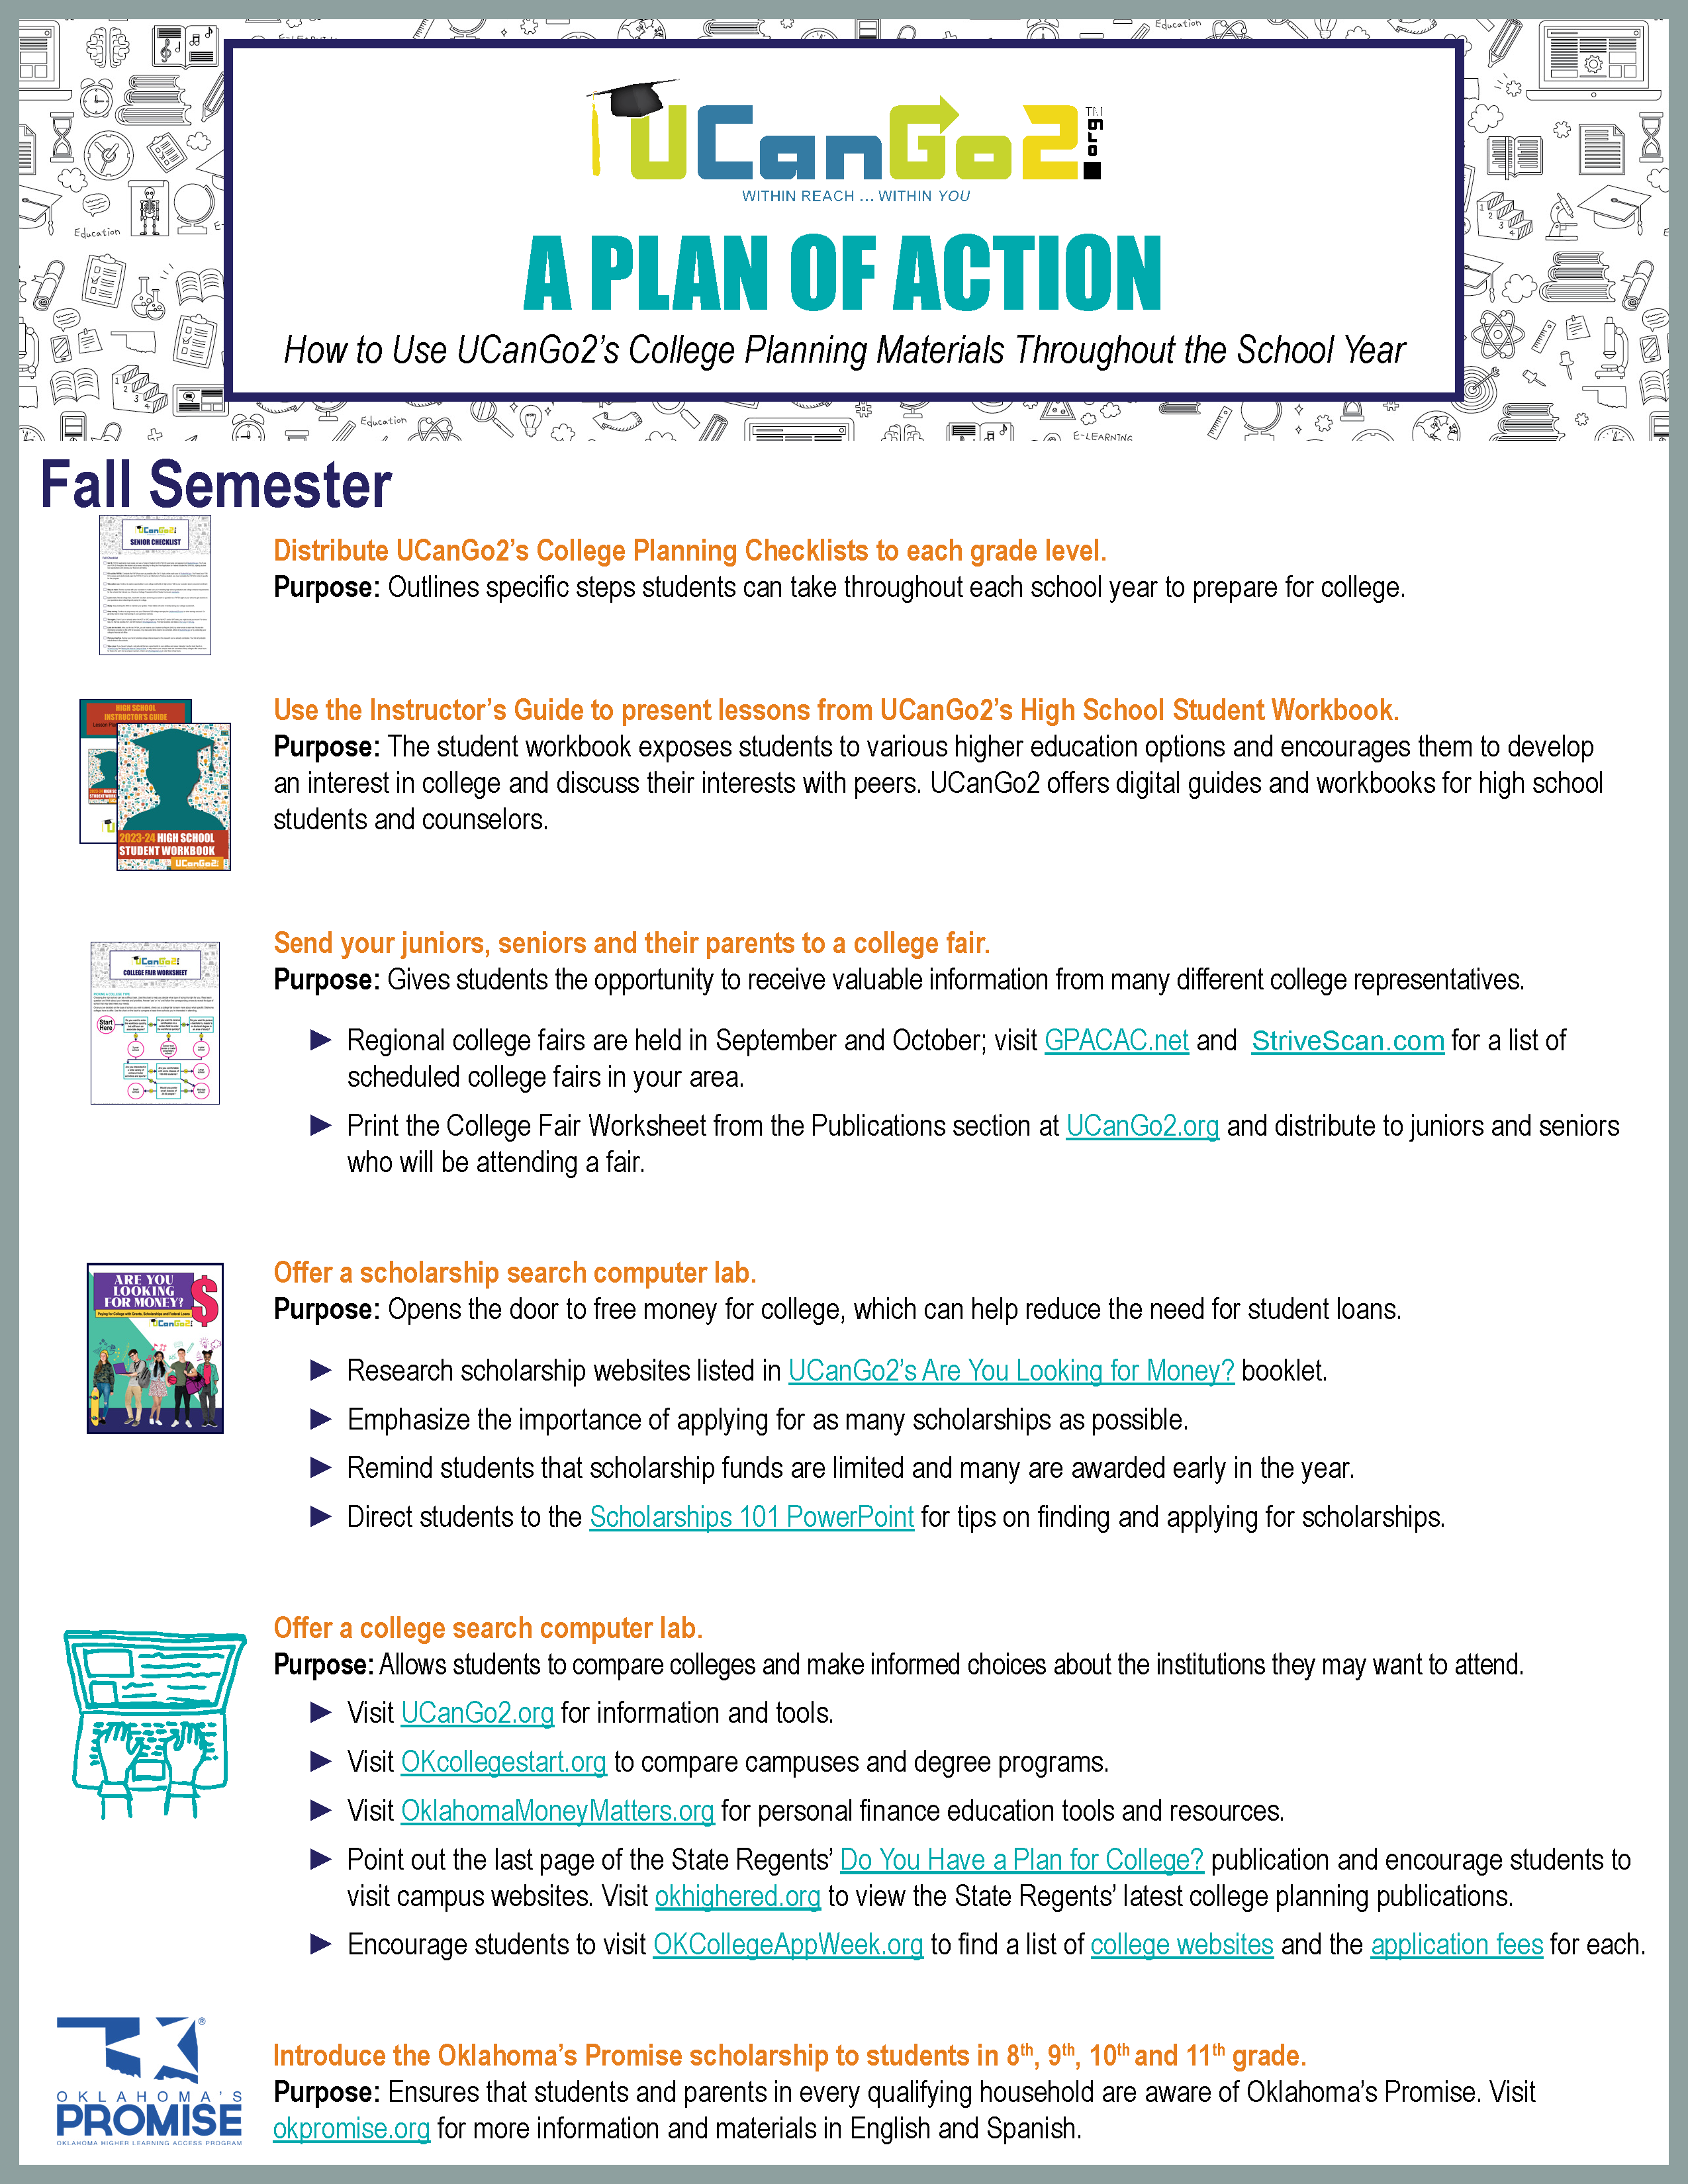 PDf of A Plan of Action opens in a new tab